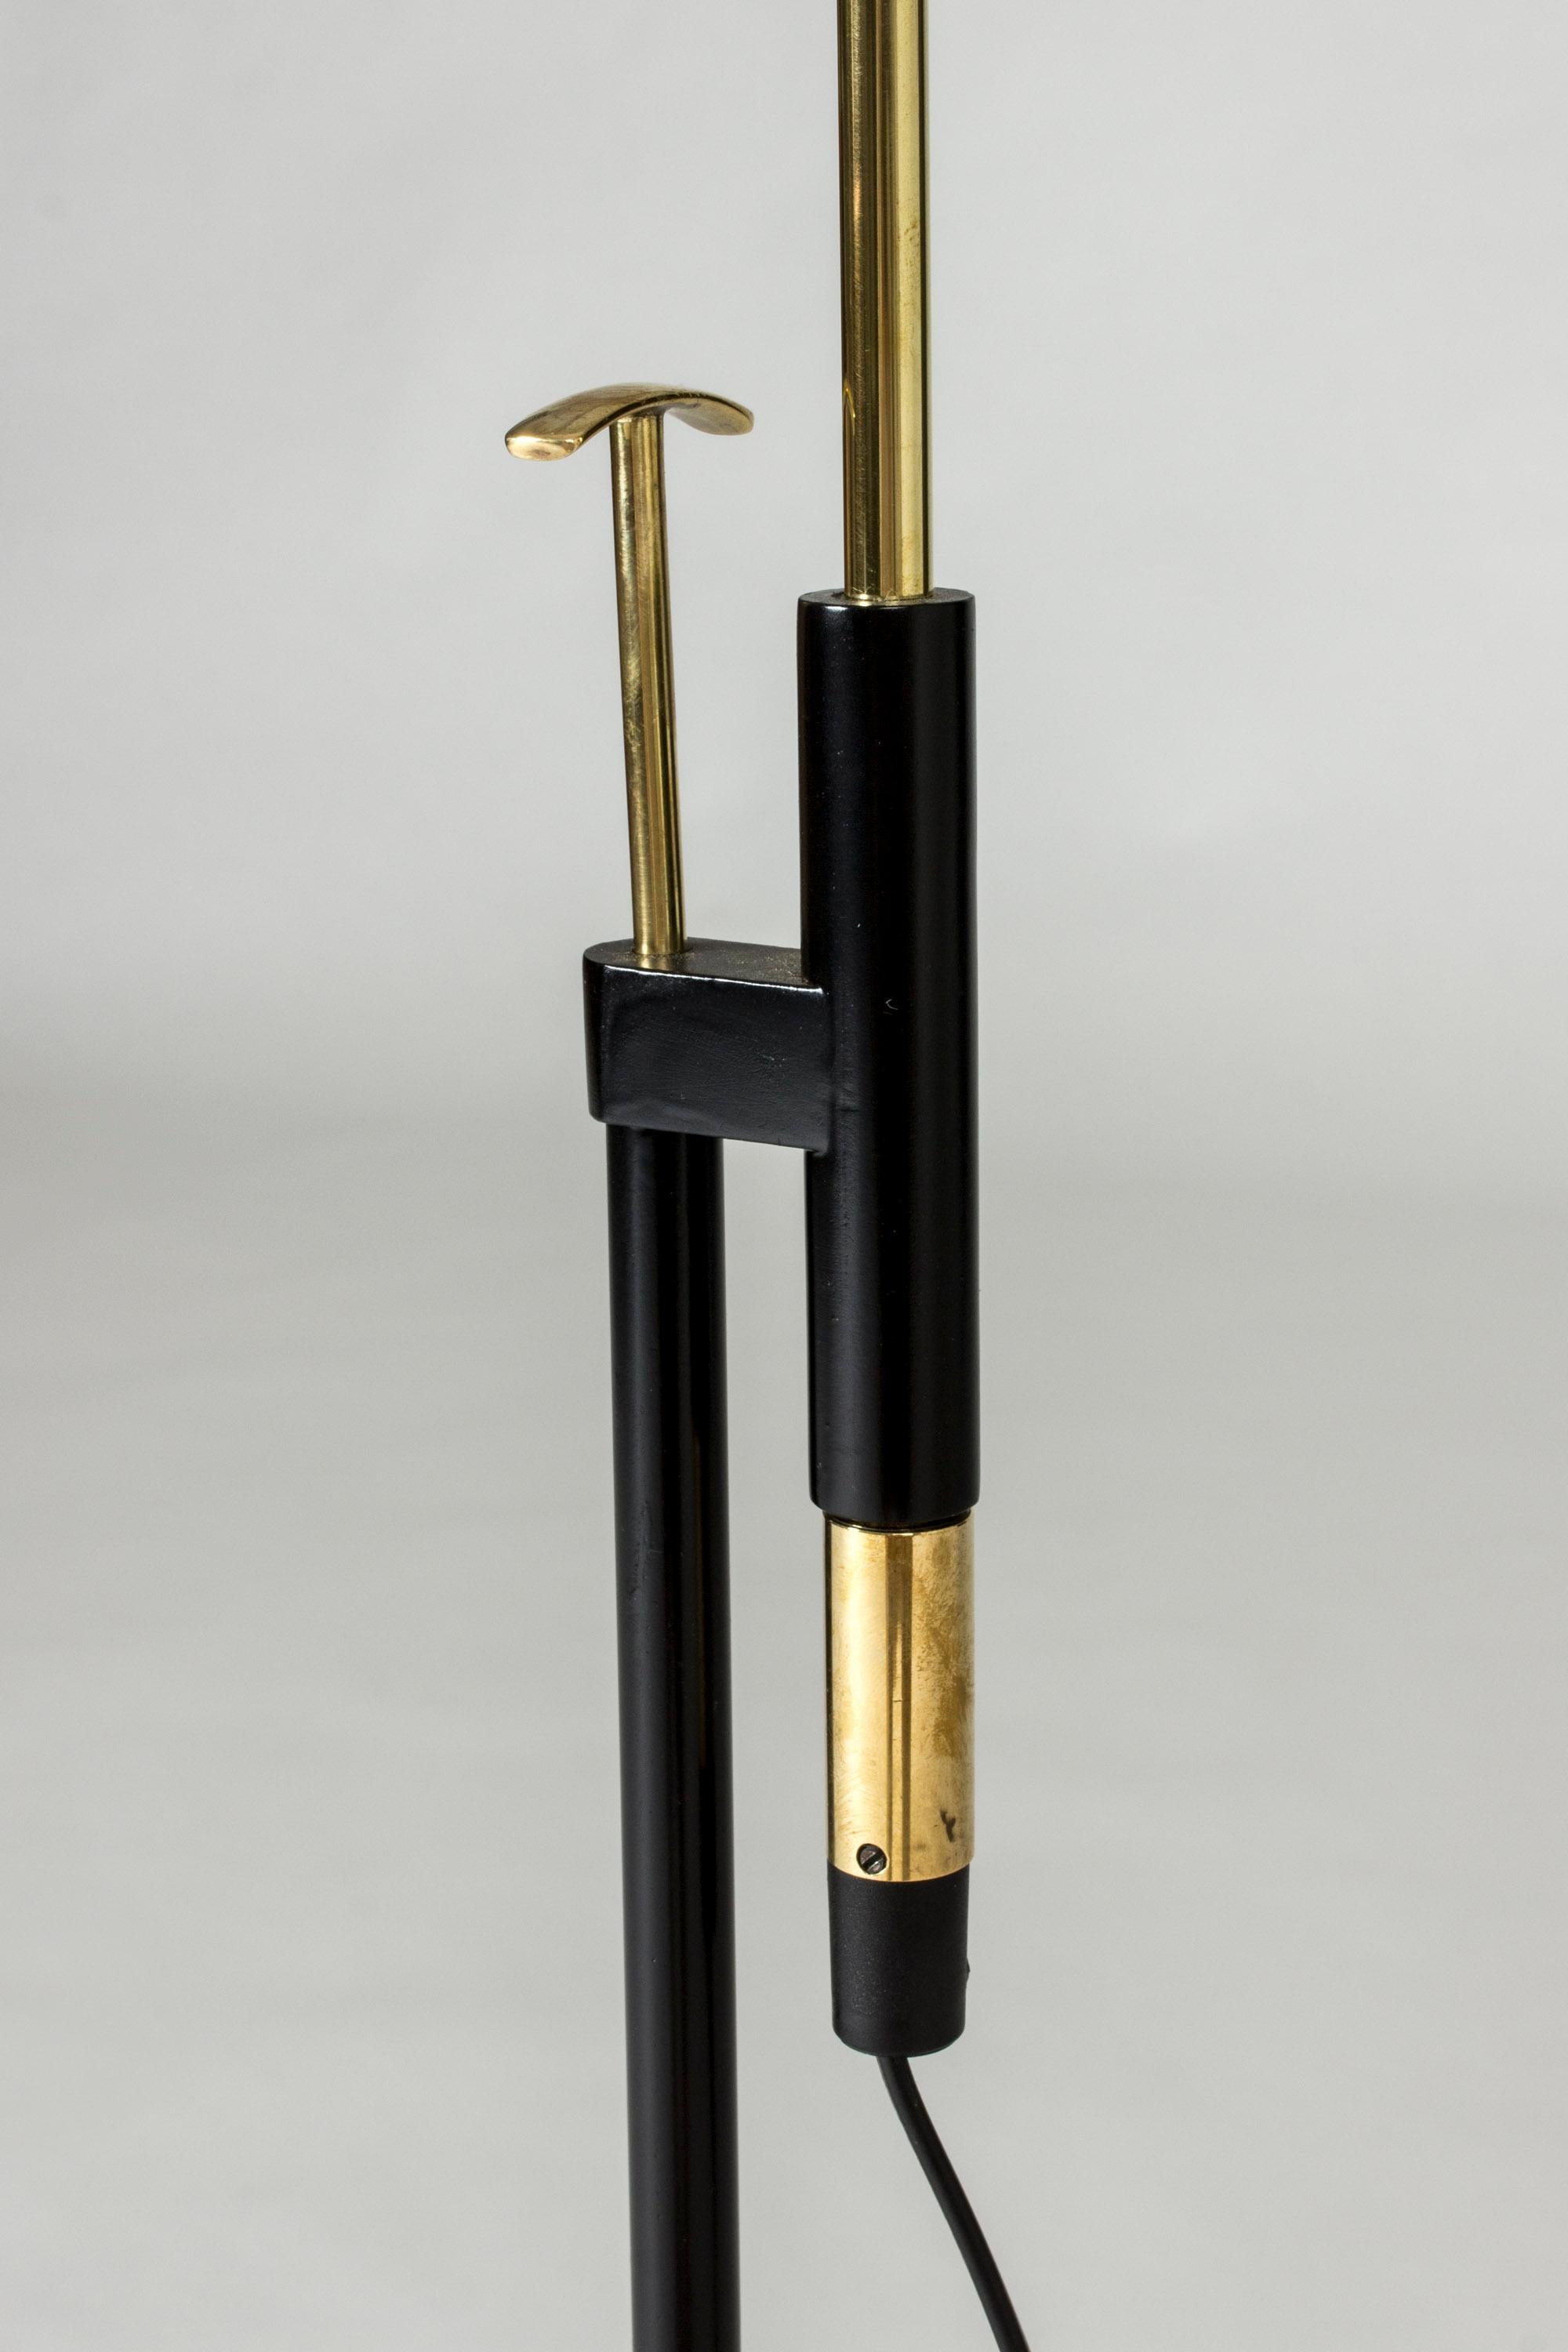 Swedish Midcentury Brass & Lacquered Metal Floor Lamp from Falkenbergs Belysning, 1950s